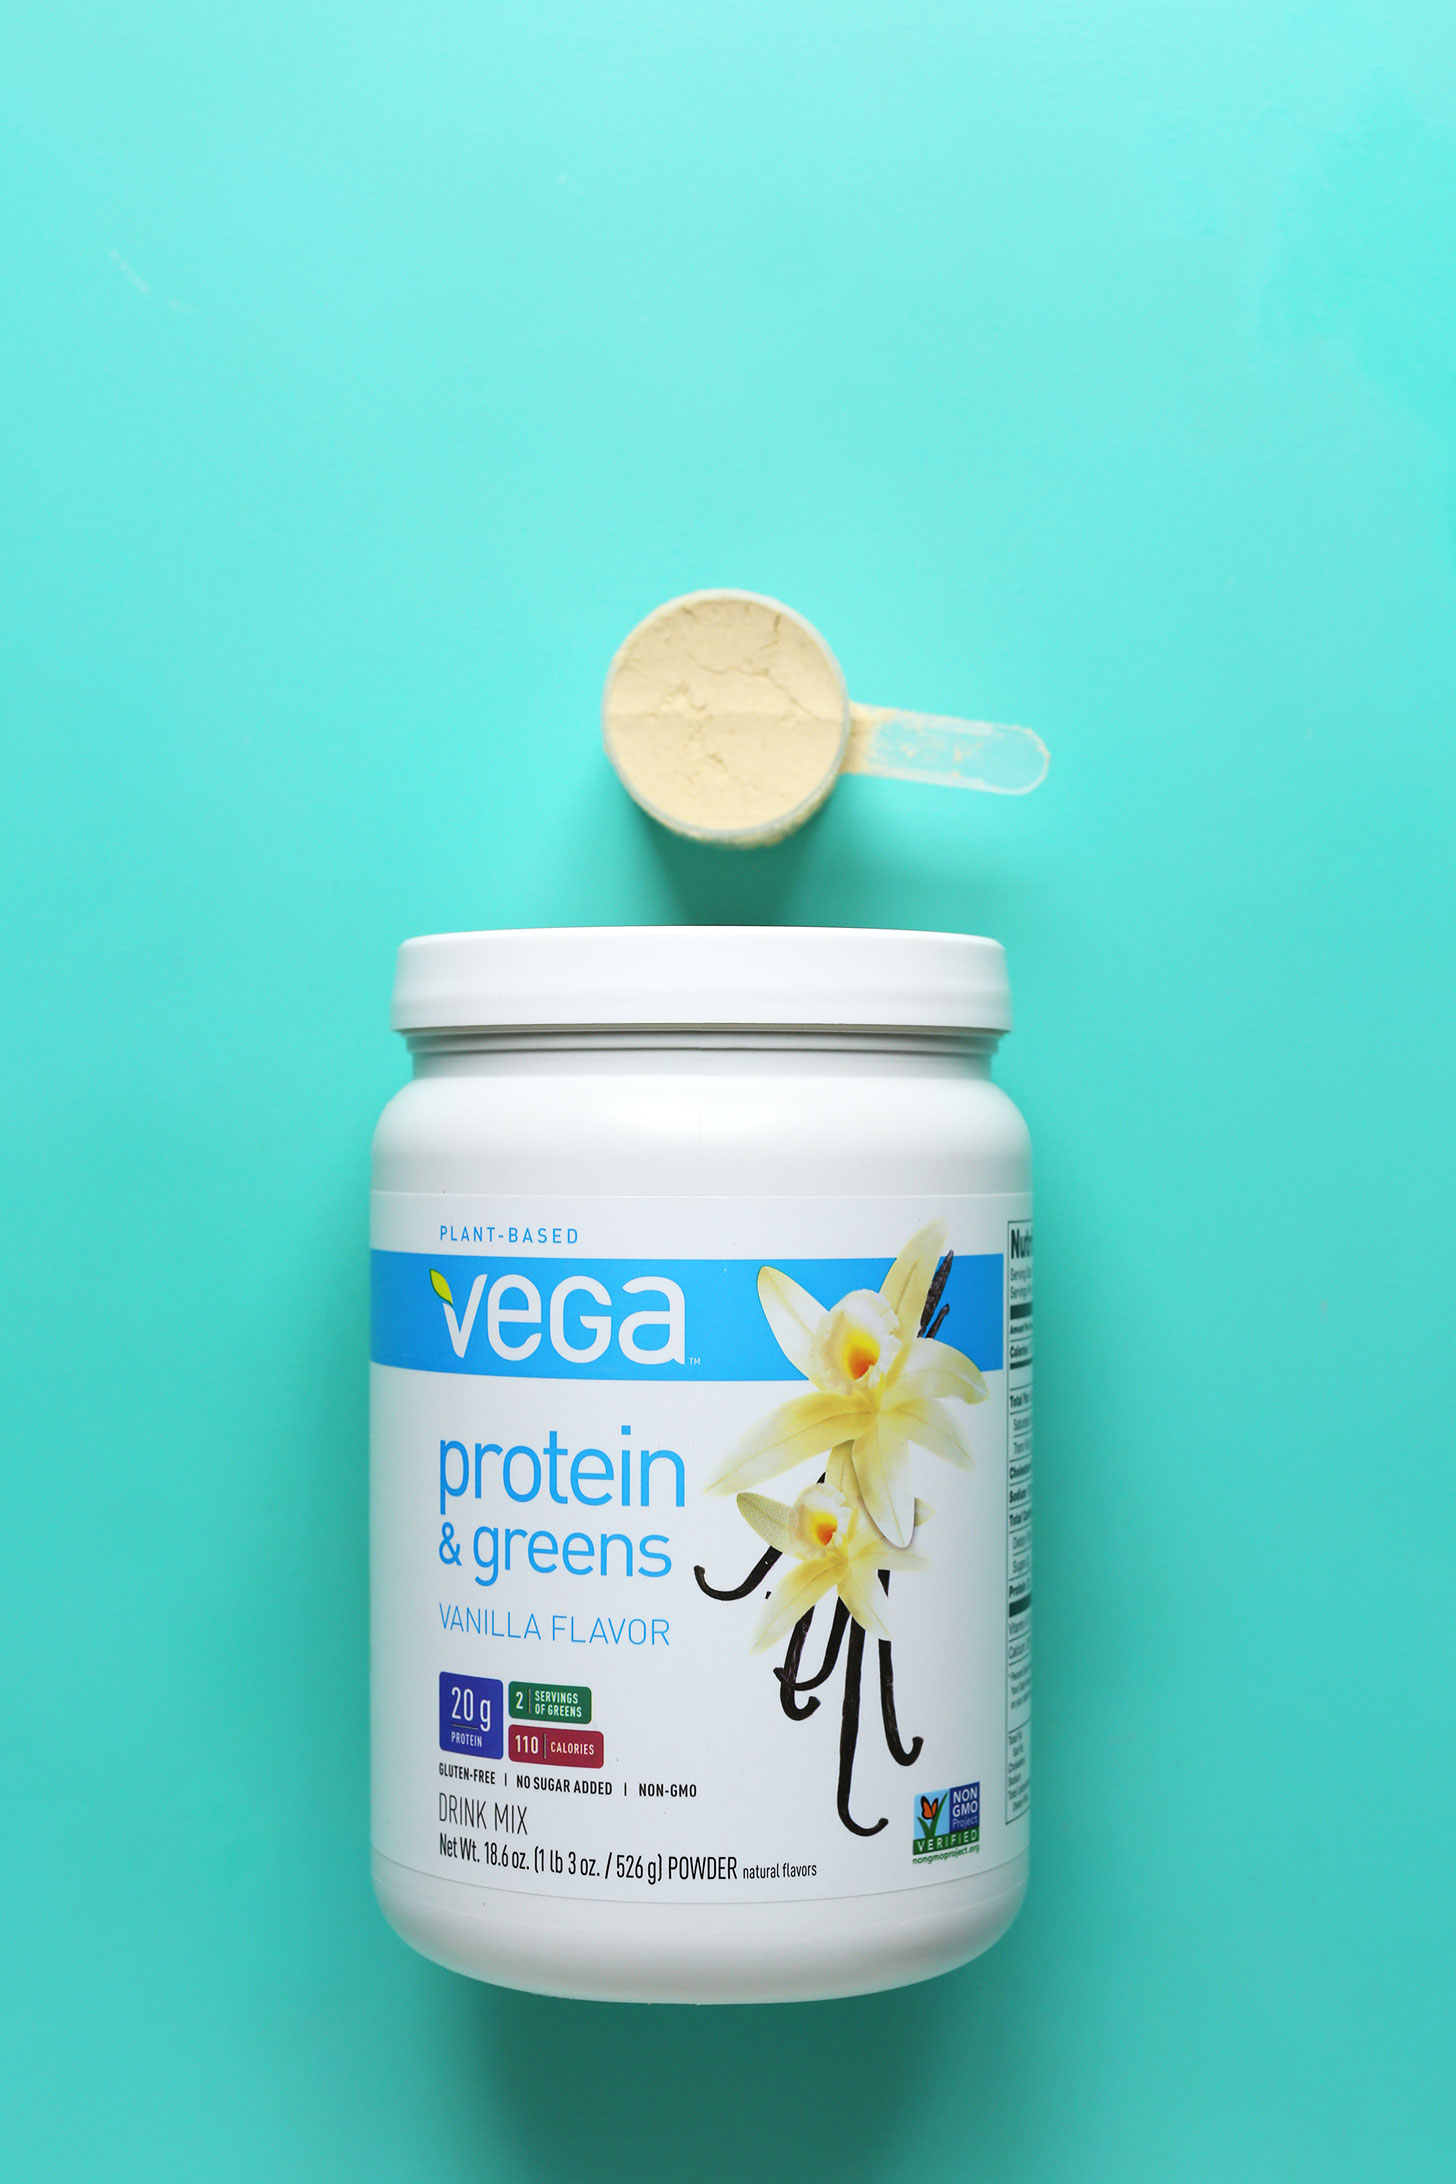 Vega protein and greens vanilla protein powder review